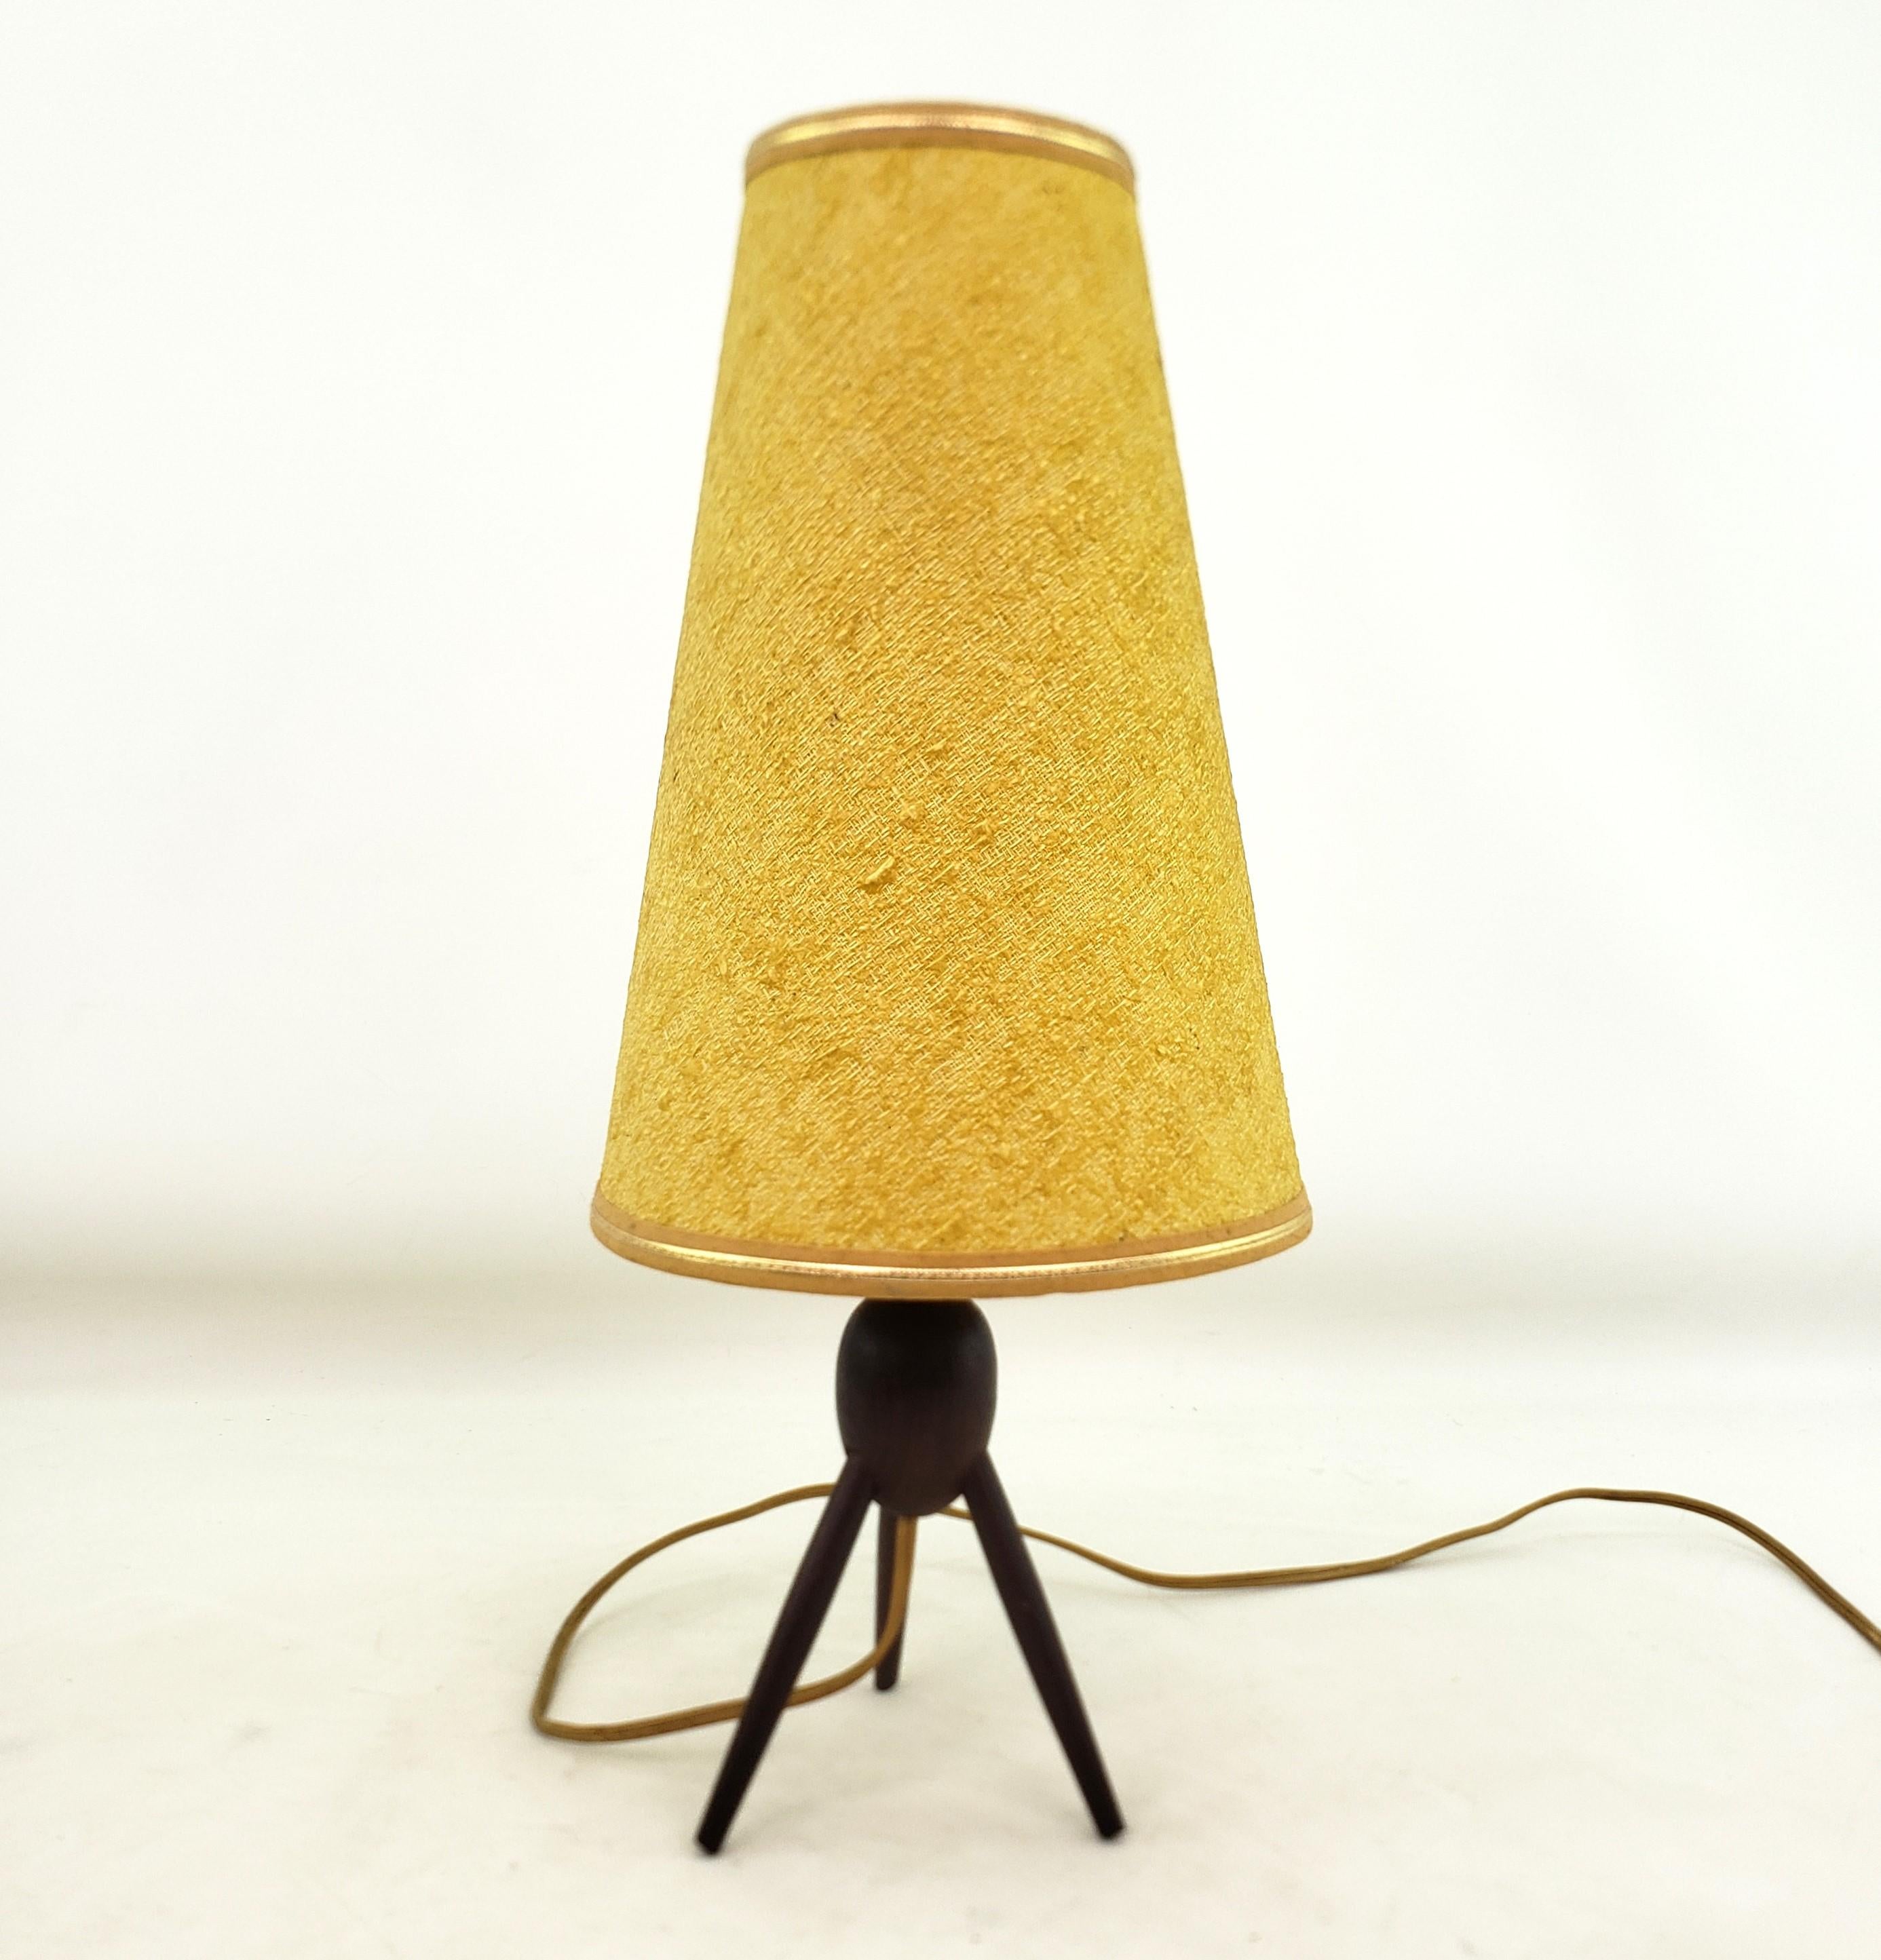 This small accent table lamp is unsigned, but presumed to originate from Denmark and date to approximately 1960 and done in the period Mid-Century Modern style. The lamp base is composed of solid teak wood with a  ball center and three spayed teak